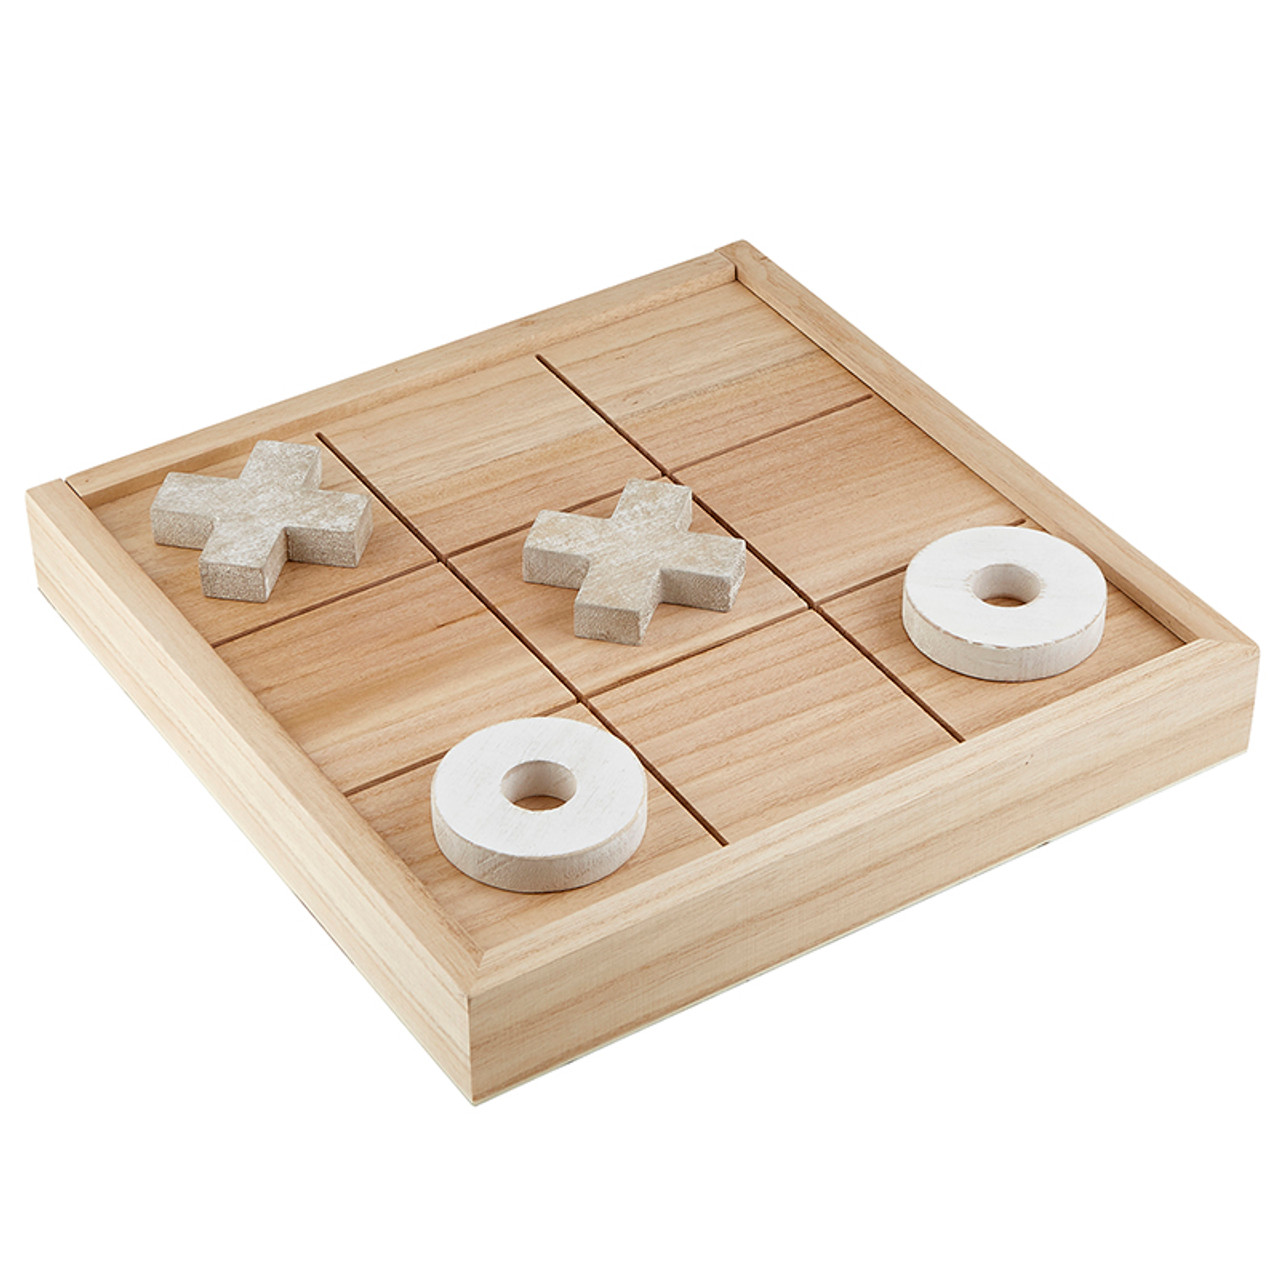 Mosaic Tic Tac Toe - Wooden Strategy Game-236V